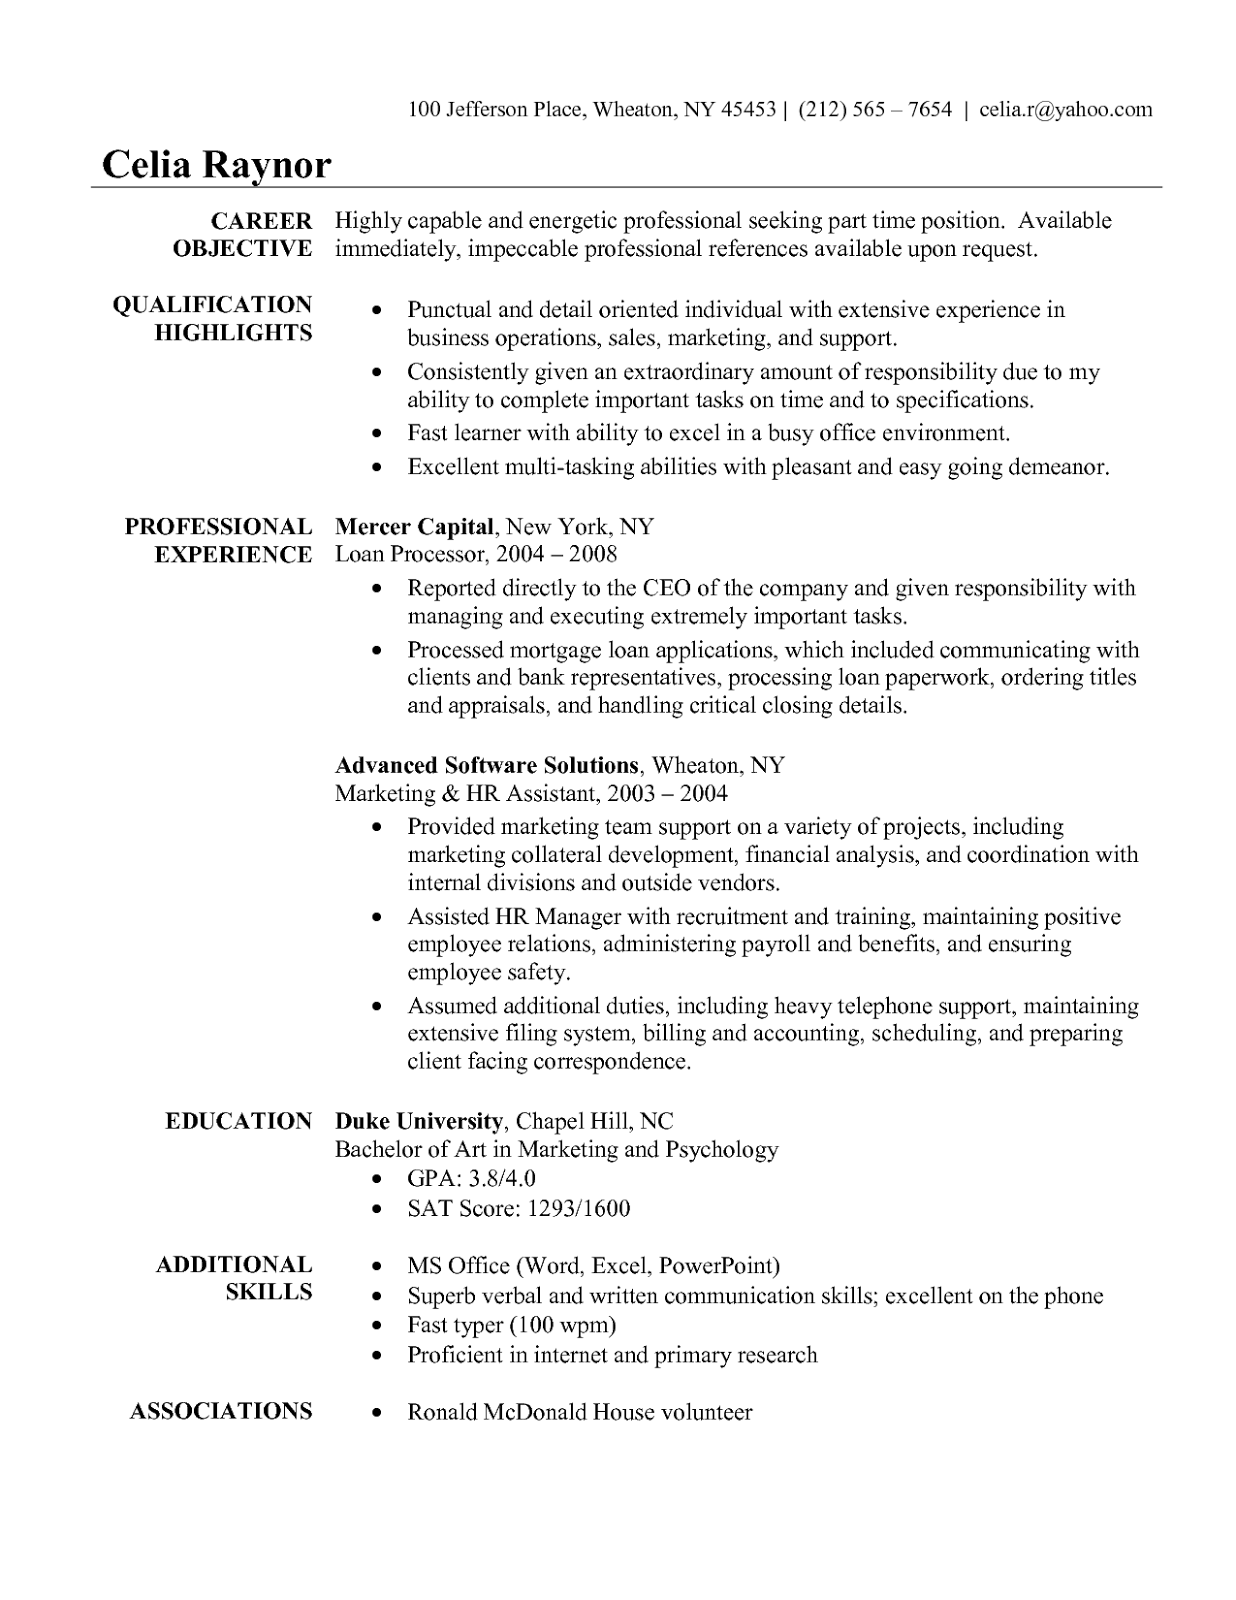 Objective part of resume